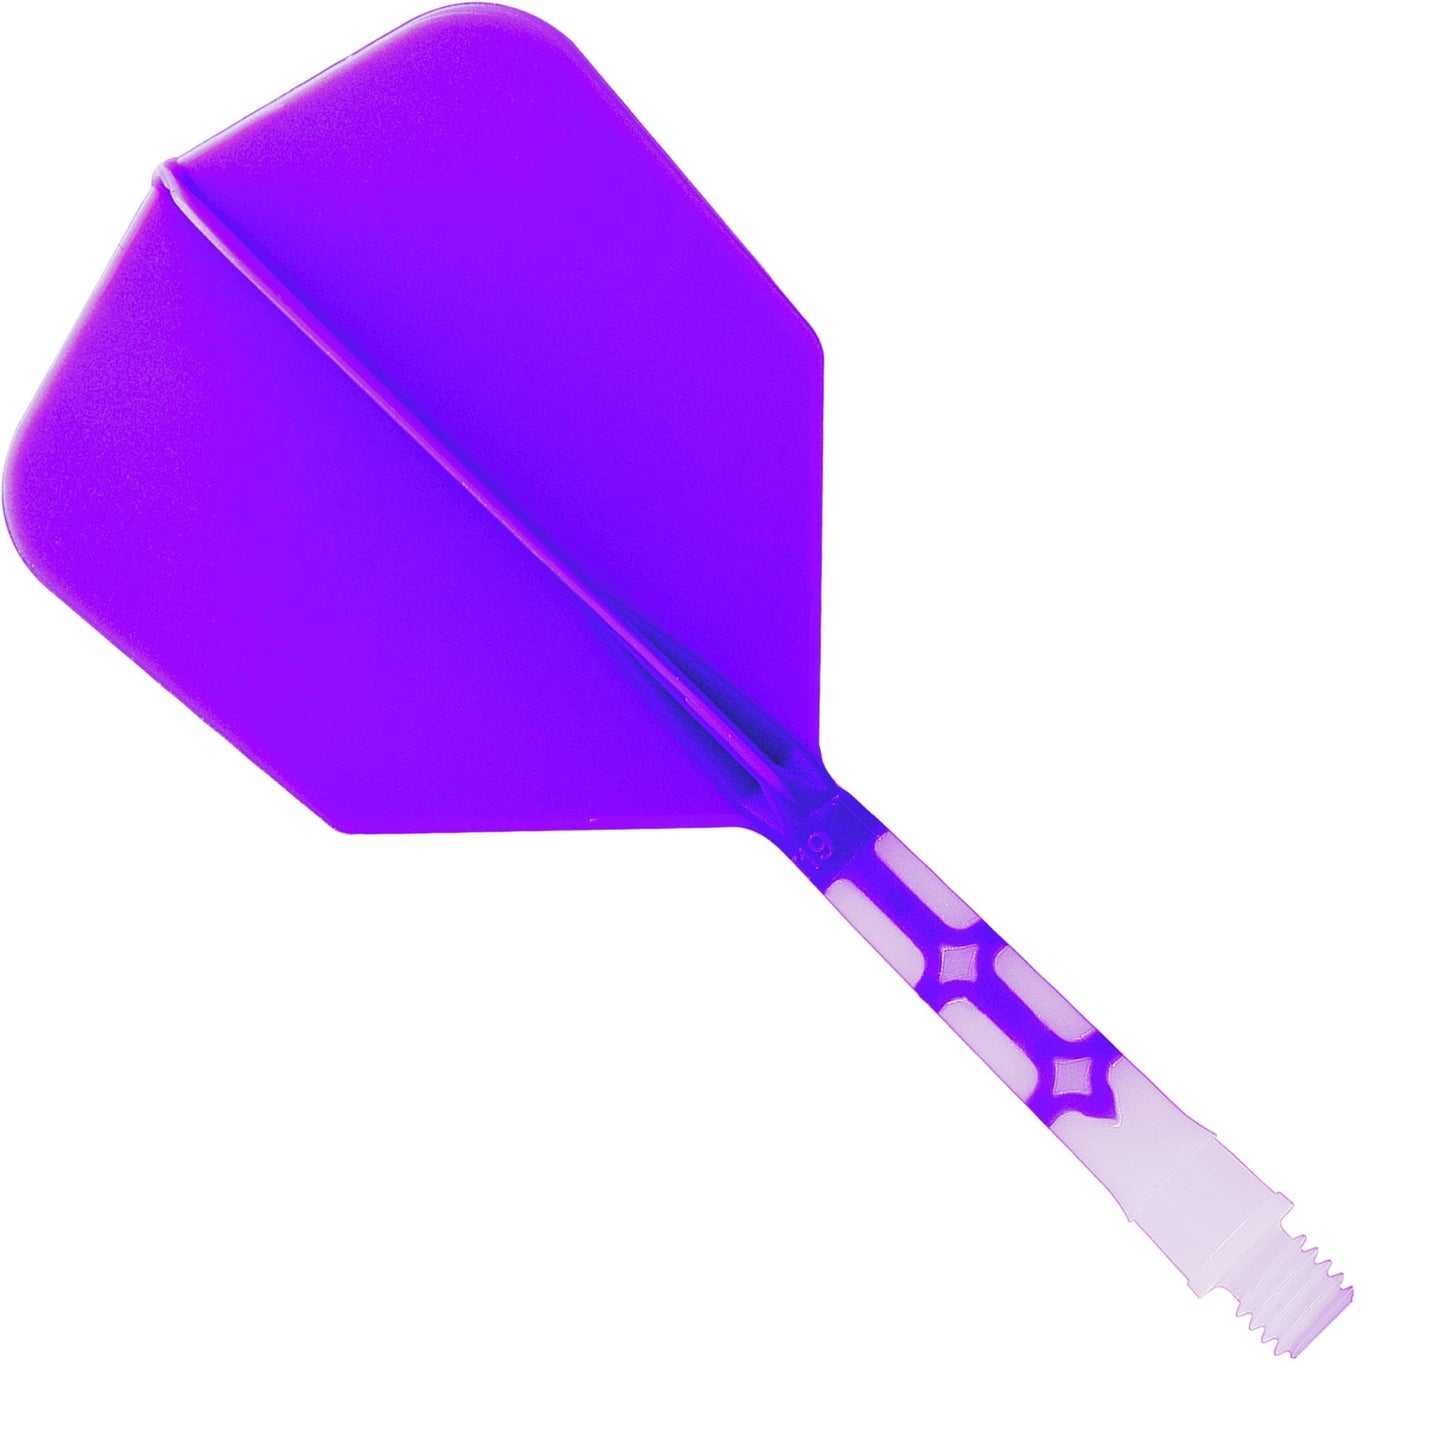 Cuesoul Rost T19 Integrated Dart Shaft and Flights - Big Wing - White with Purple Flight Medium